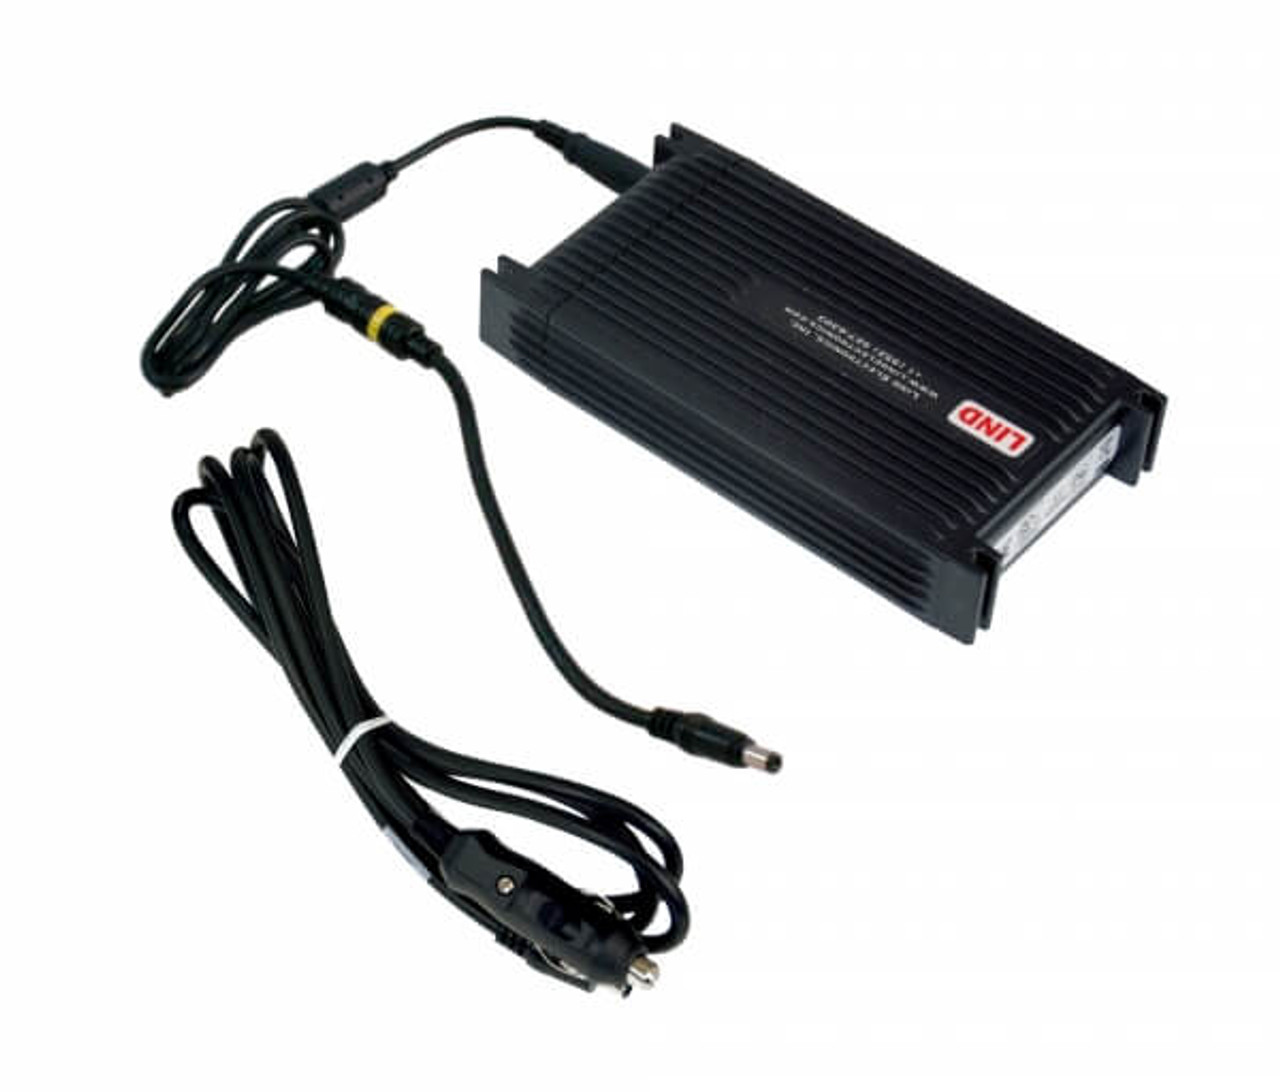 Havis LPS-137 Power Supply (w/ Ferrite Bead for In-Vehicle EMI Suppression), Use w/ DS-DELL-100, 110, 200, 210, 220, 230, 300, 410, & 420 Series, & DS-GD-300 Series Docking Stations